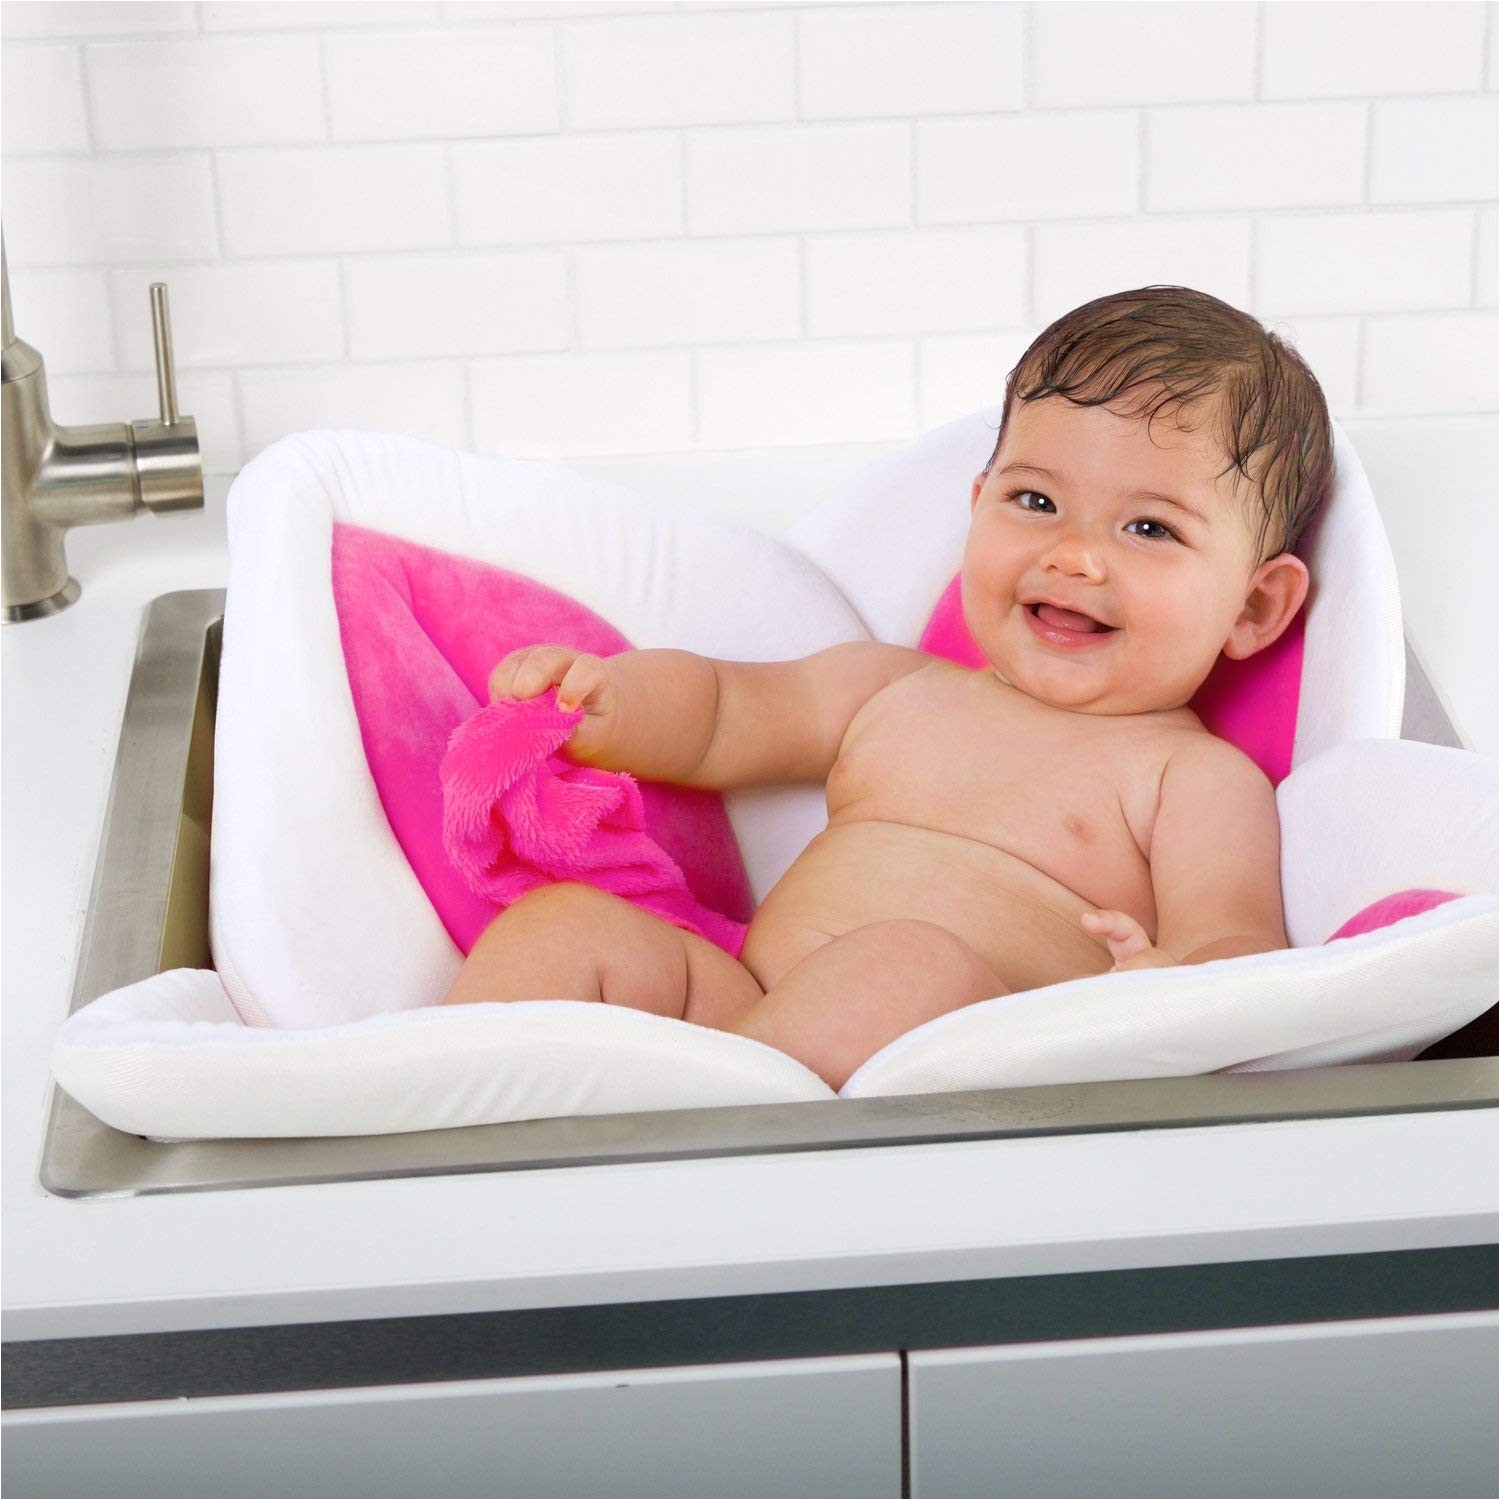 babies and baths awesome blooming bath sink yellowh baby seat tub bathtubi 0d exciting flower